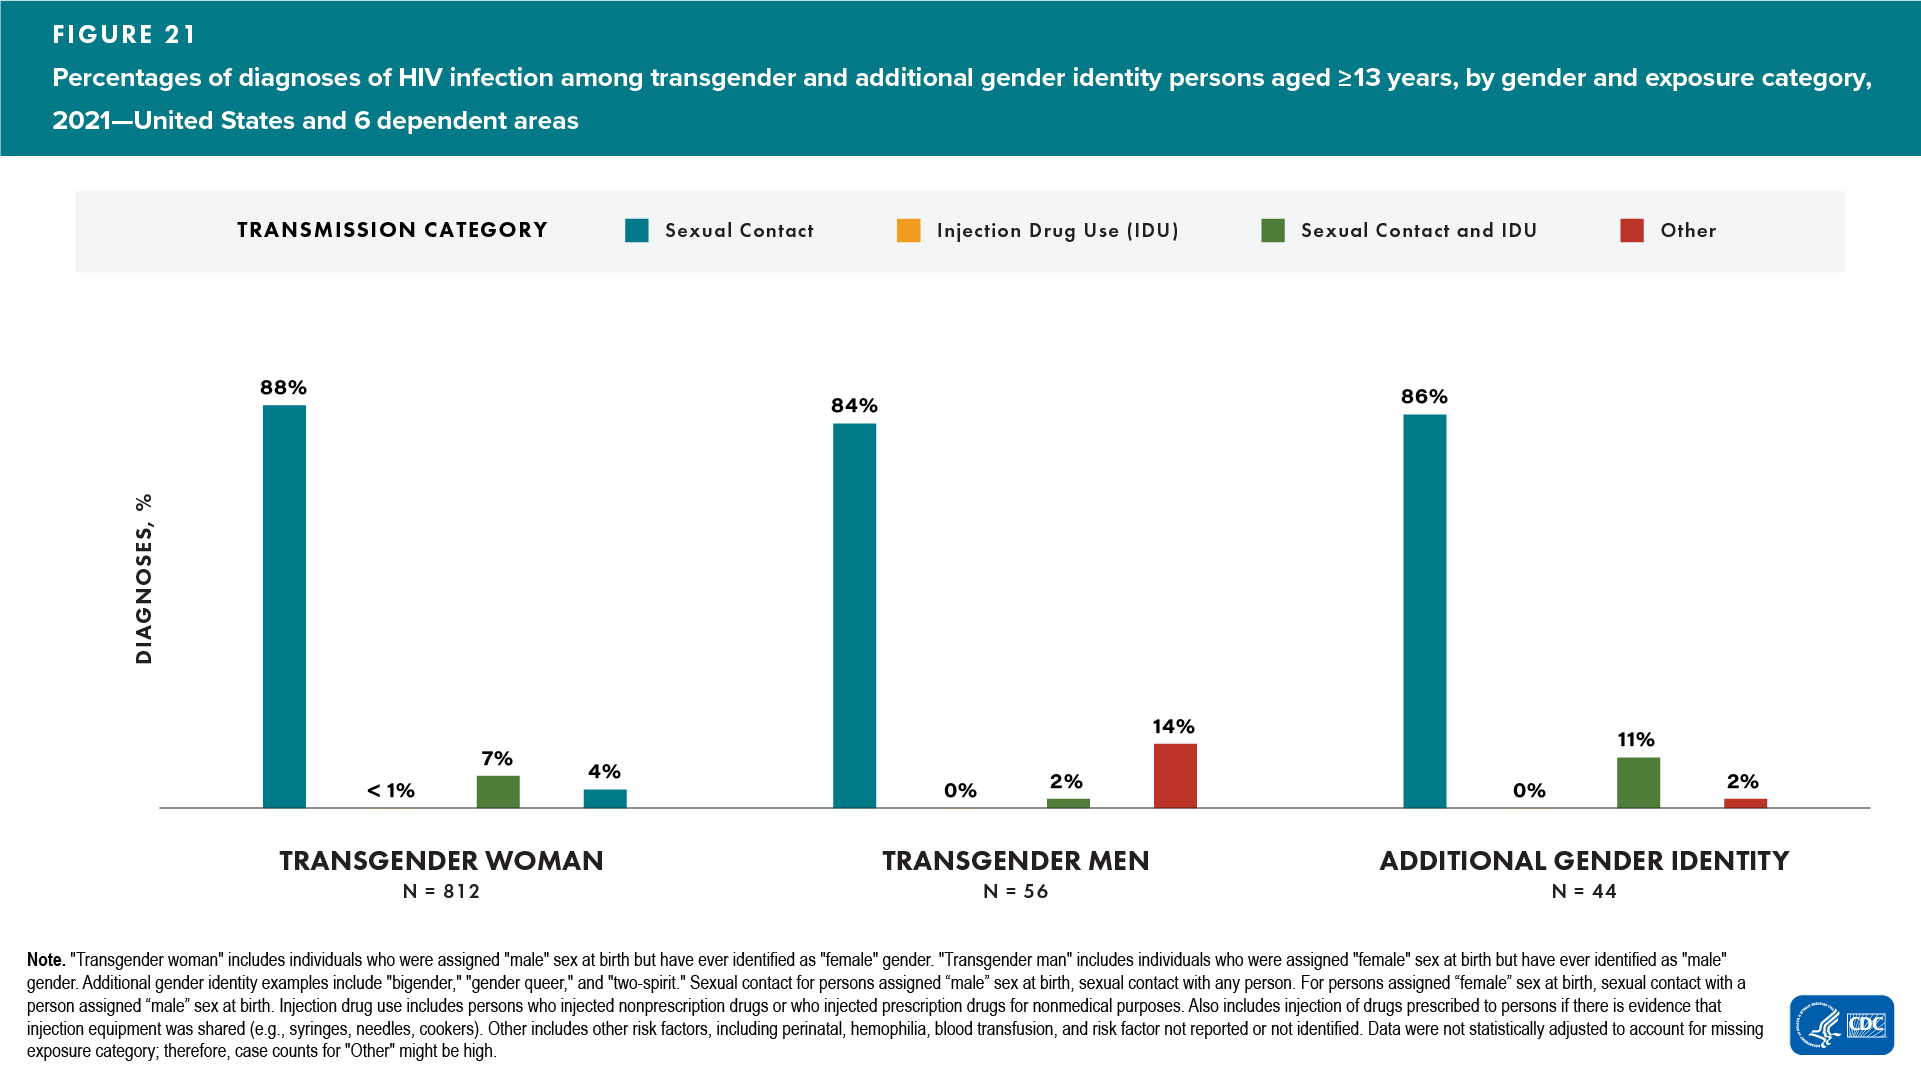 In 2021, in the United States and 6 dependent areas, infections attributed to sexual contact had the highest percentage for exposure categories among transgender women (88%), transgender men (84%), and additional gender identity persons (86%).